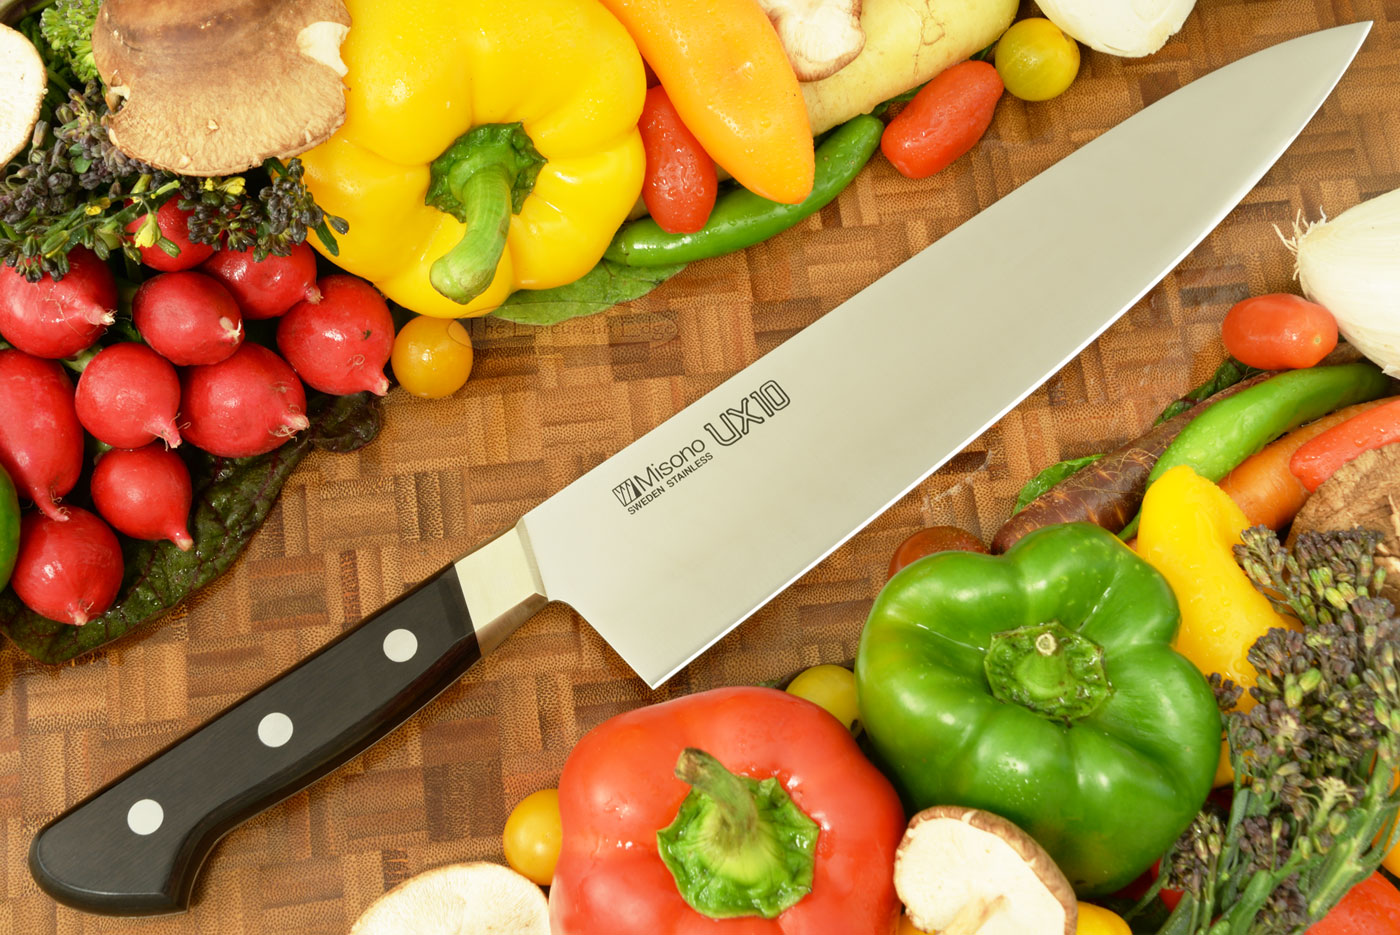 UX10 Chef's Knife - Gyuto - 10 2/3 in. (270mm) - No. 714